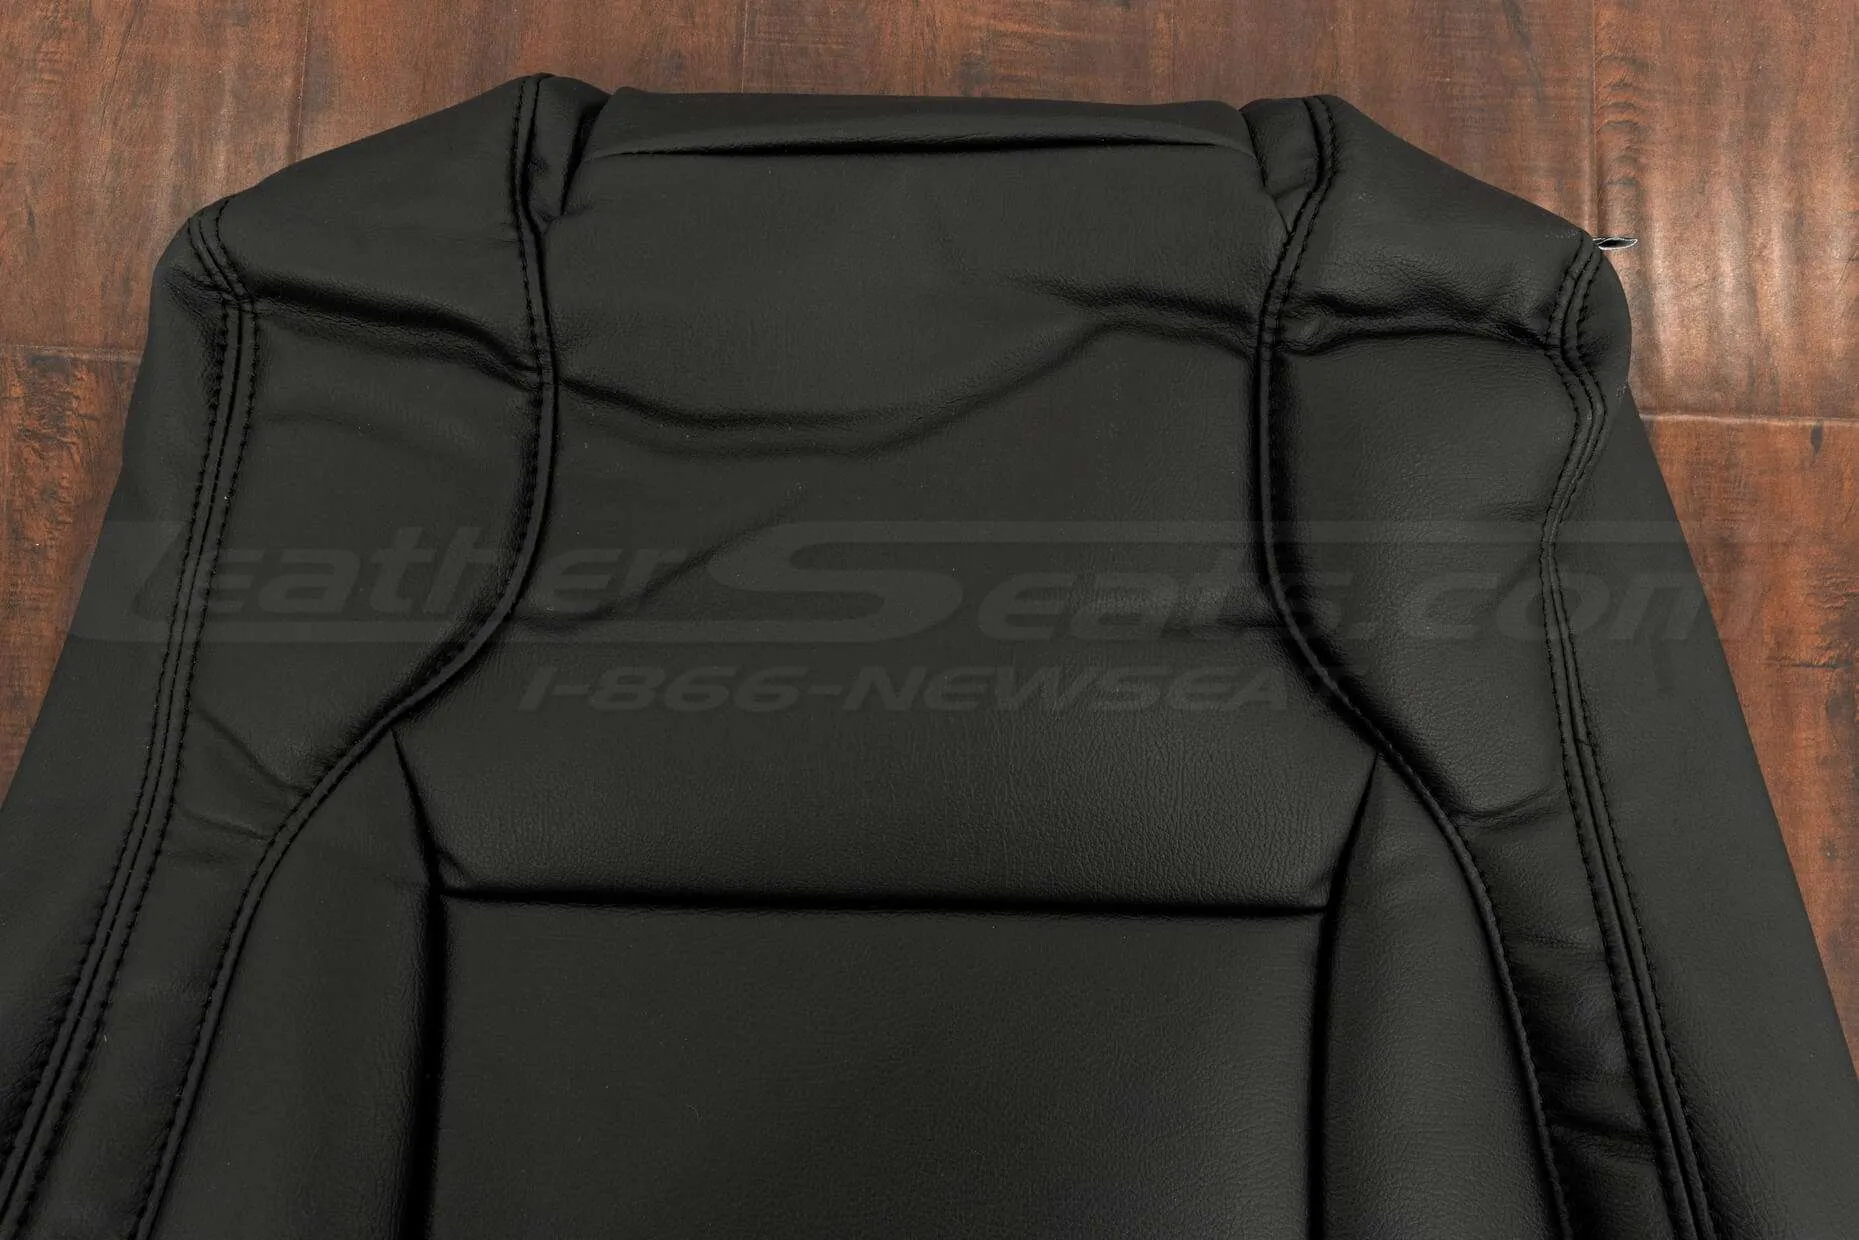 Ford Taurus Leather Upholstery Kit - Black - Front backrest close-up